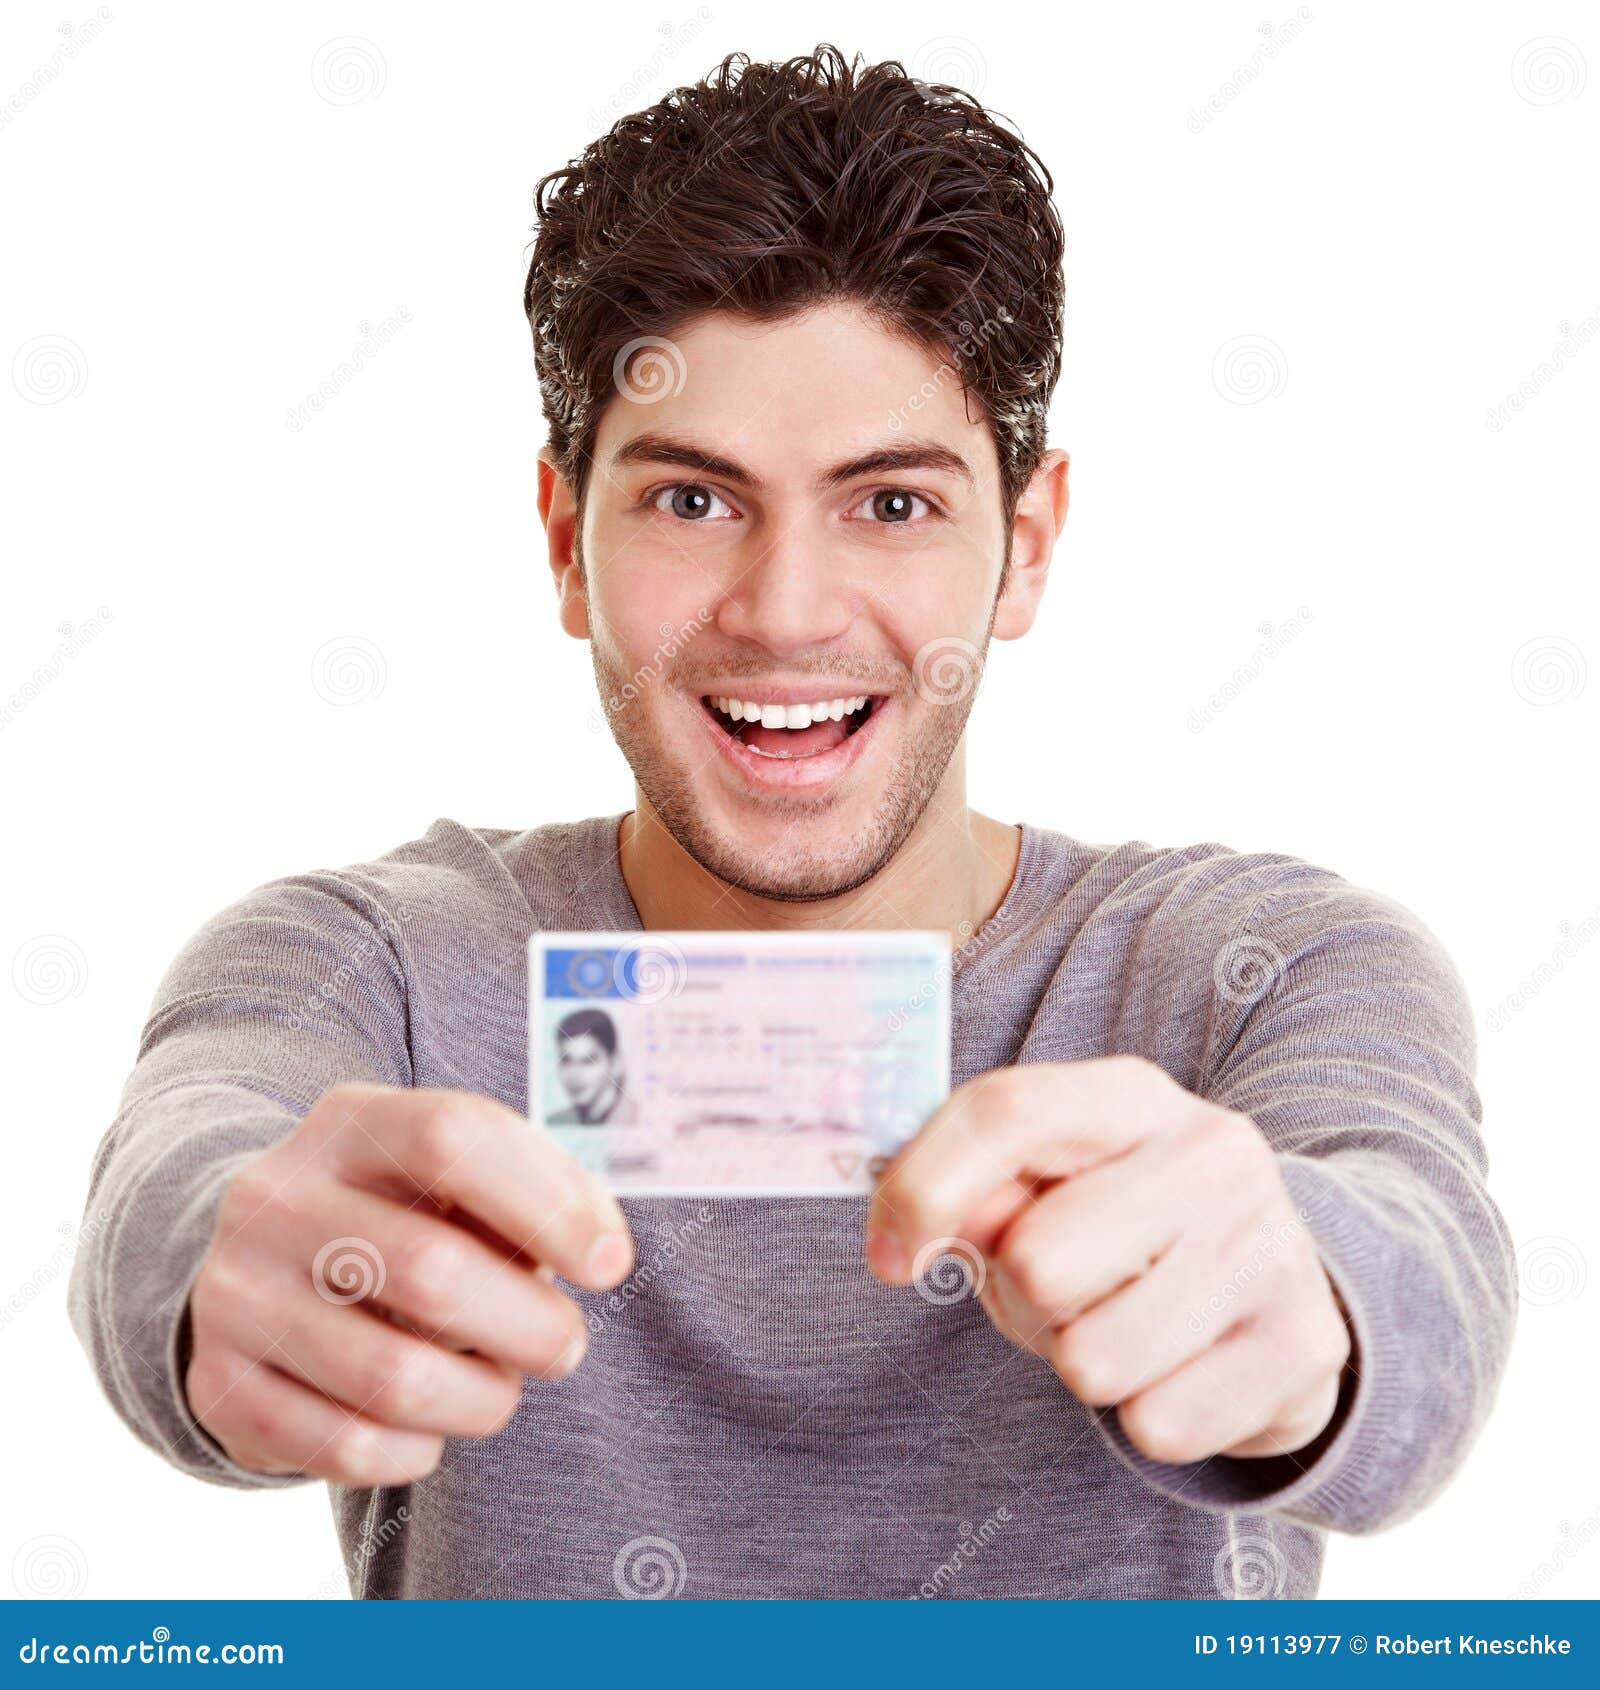 An evaluation of the age for receiving a drivers license